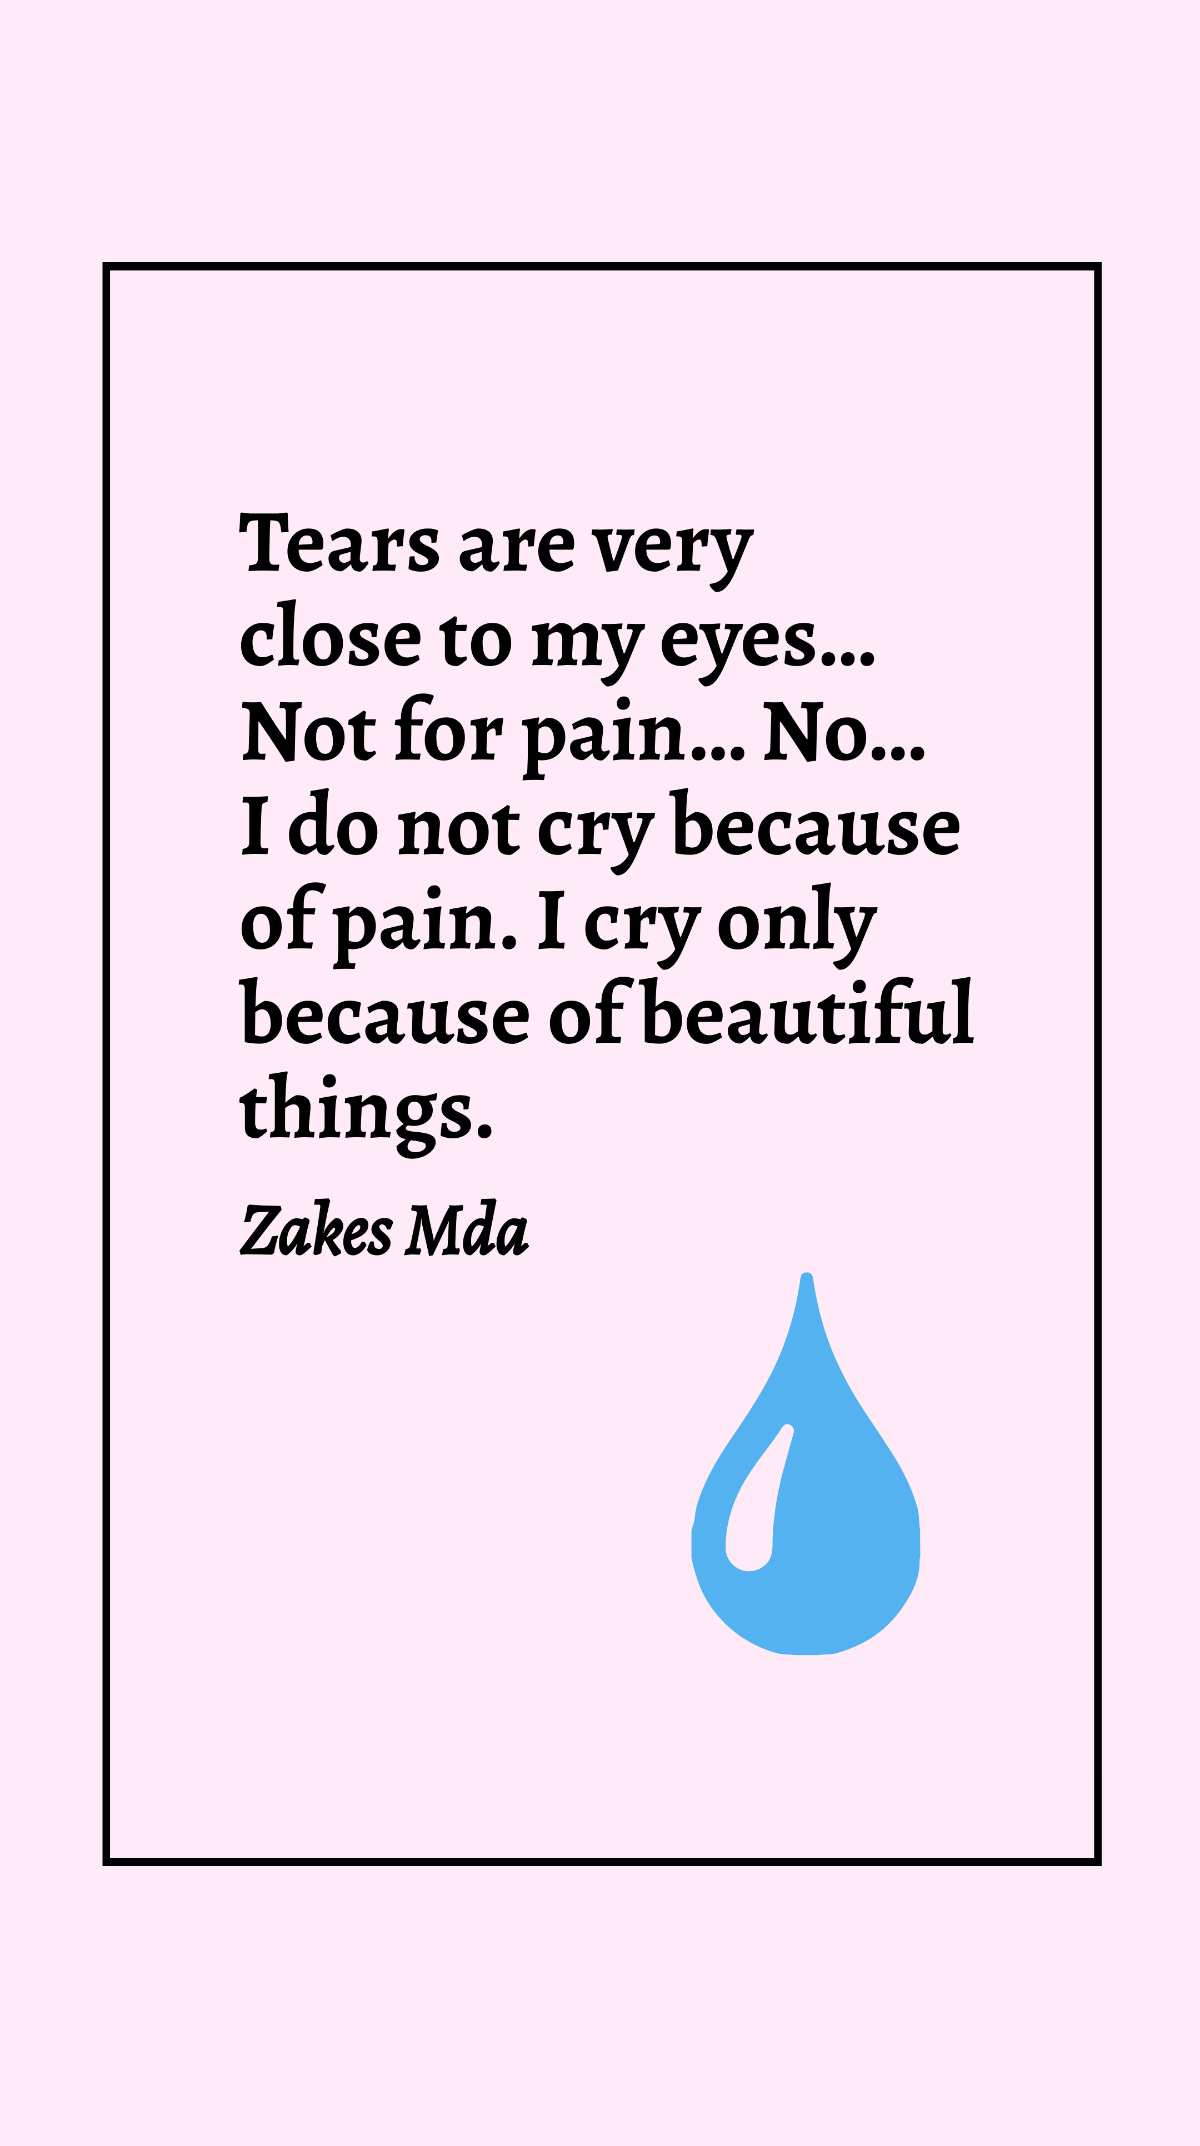 Zakes Mda - Tears are very close to my eyes… Not for pain… no… I do not cry because of pain. I cry only because of beautiful things. Template